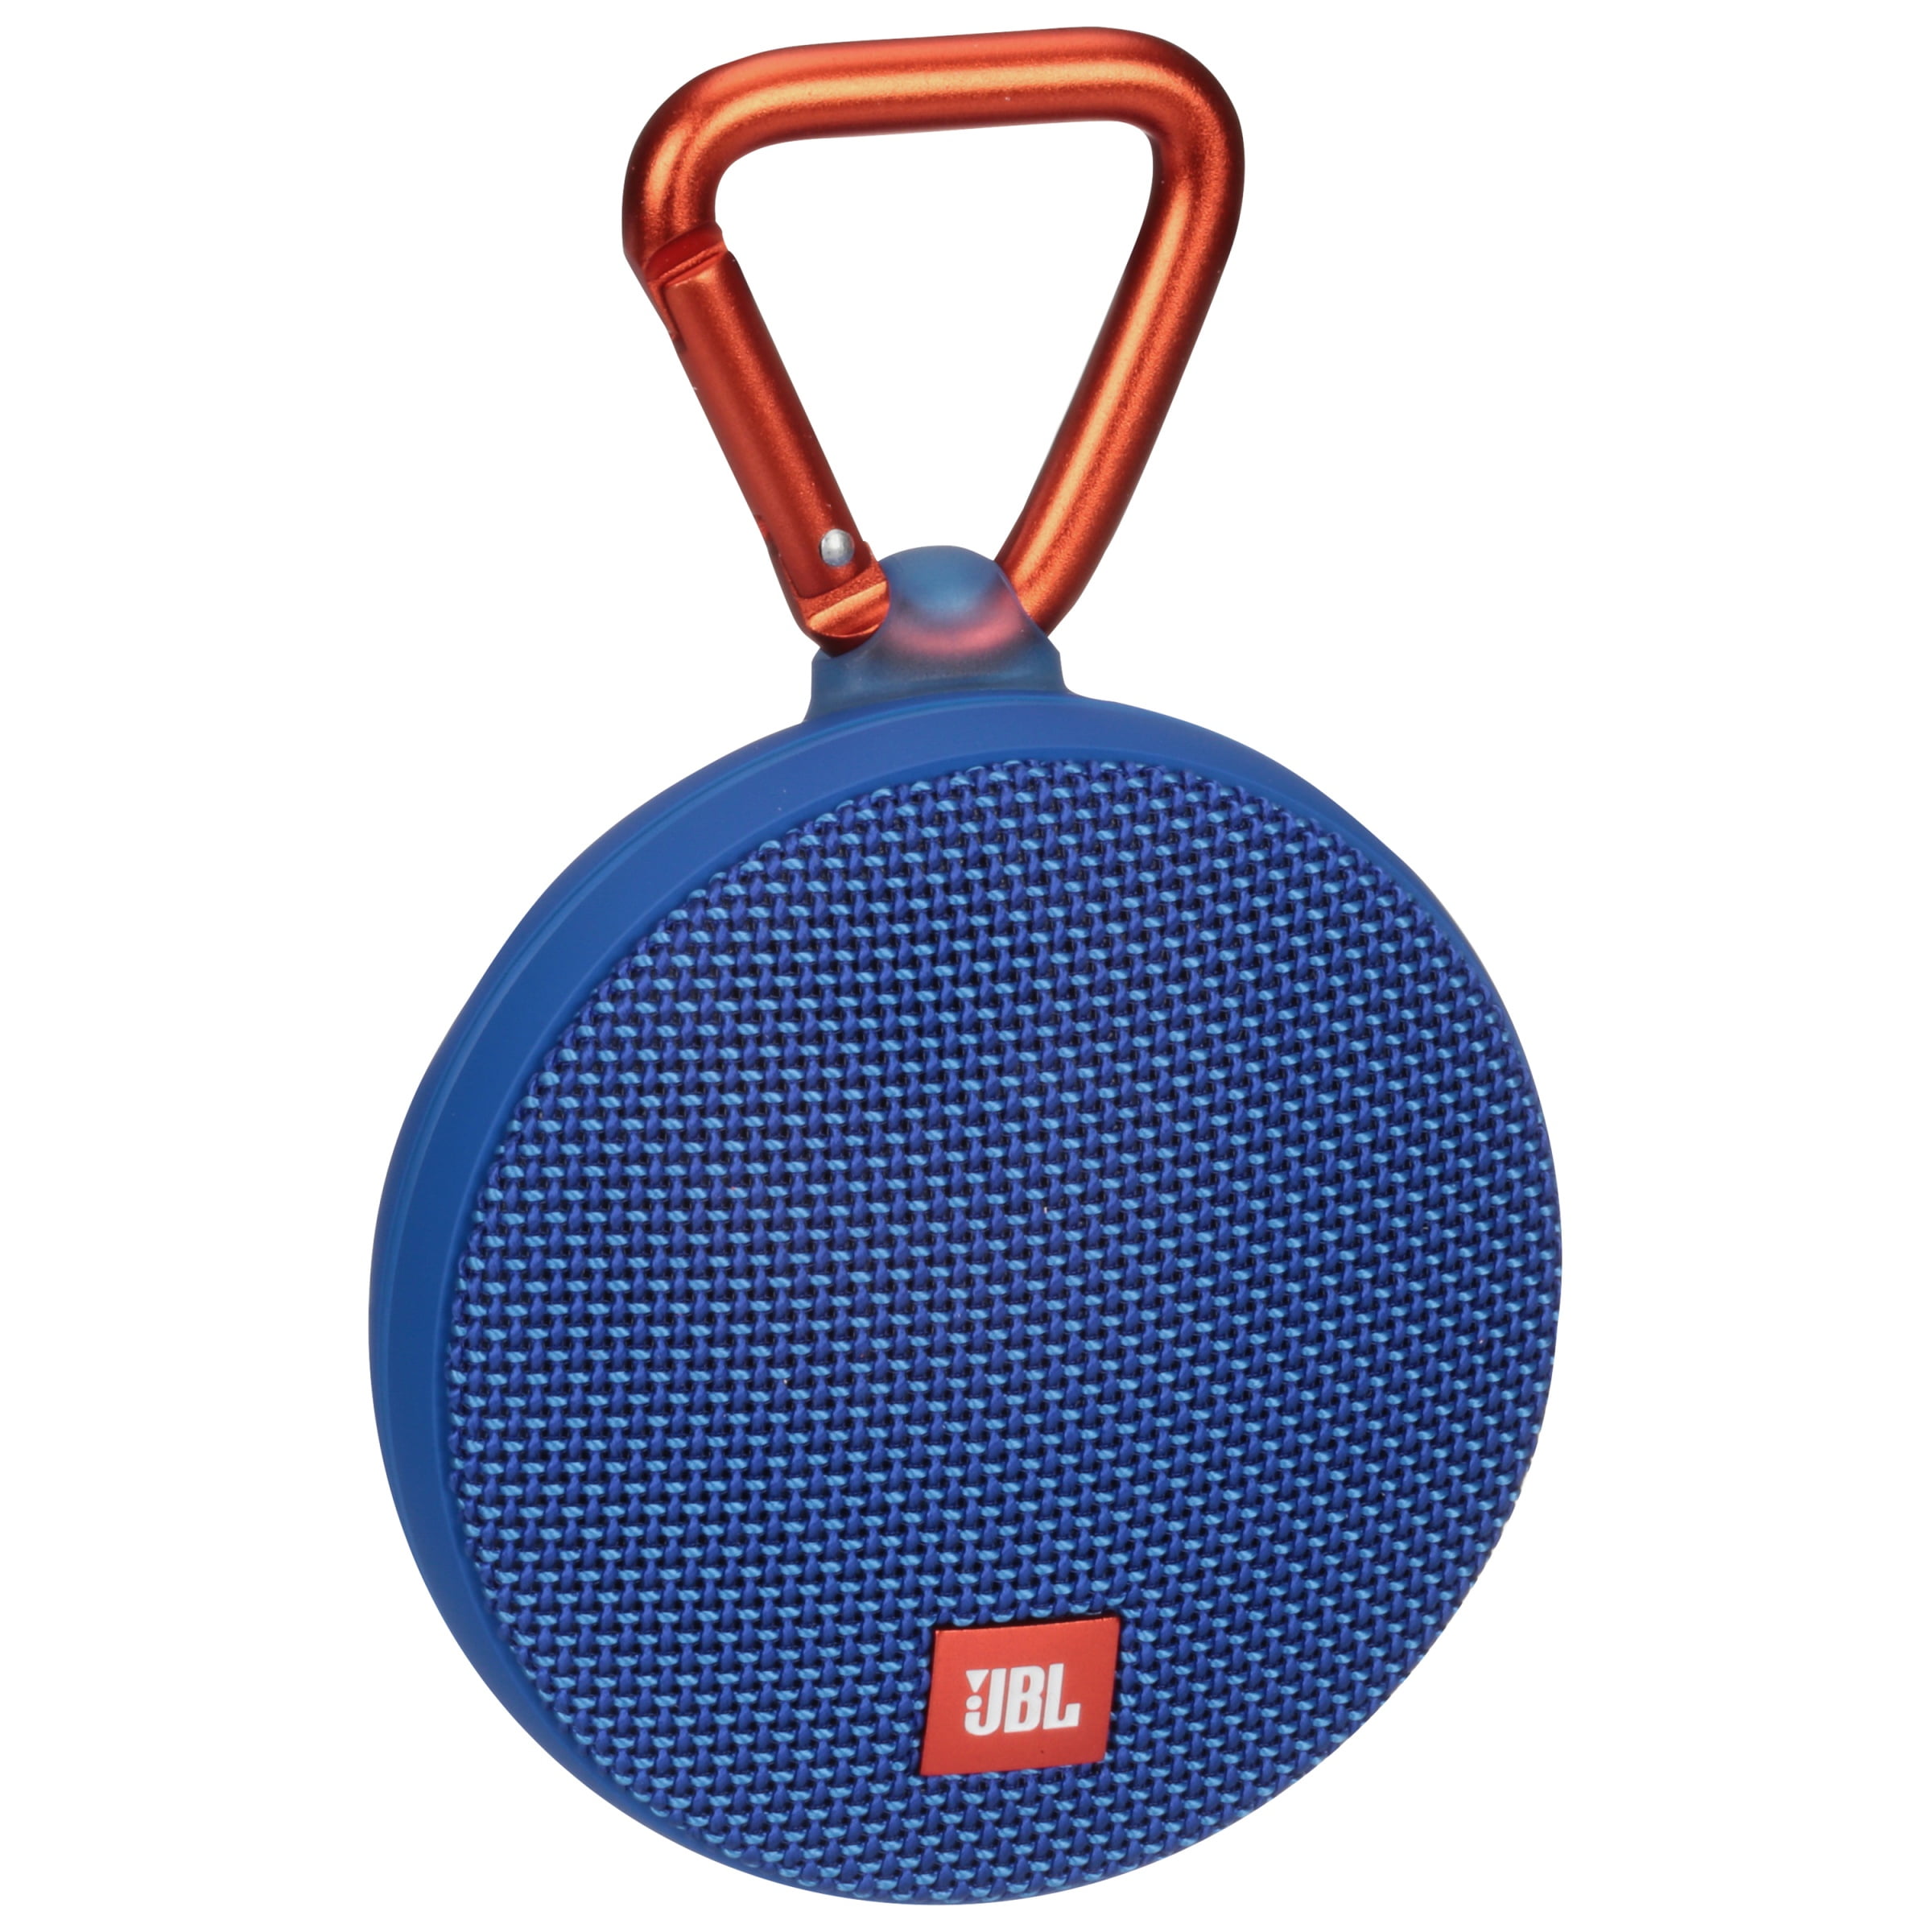 JBL Clip 2 review: Tiny Bluetooth speaker improves with full waterproofing,  boosted battery life - CNET